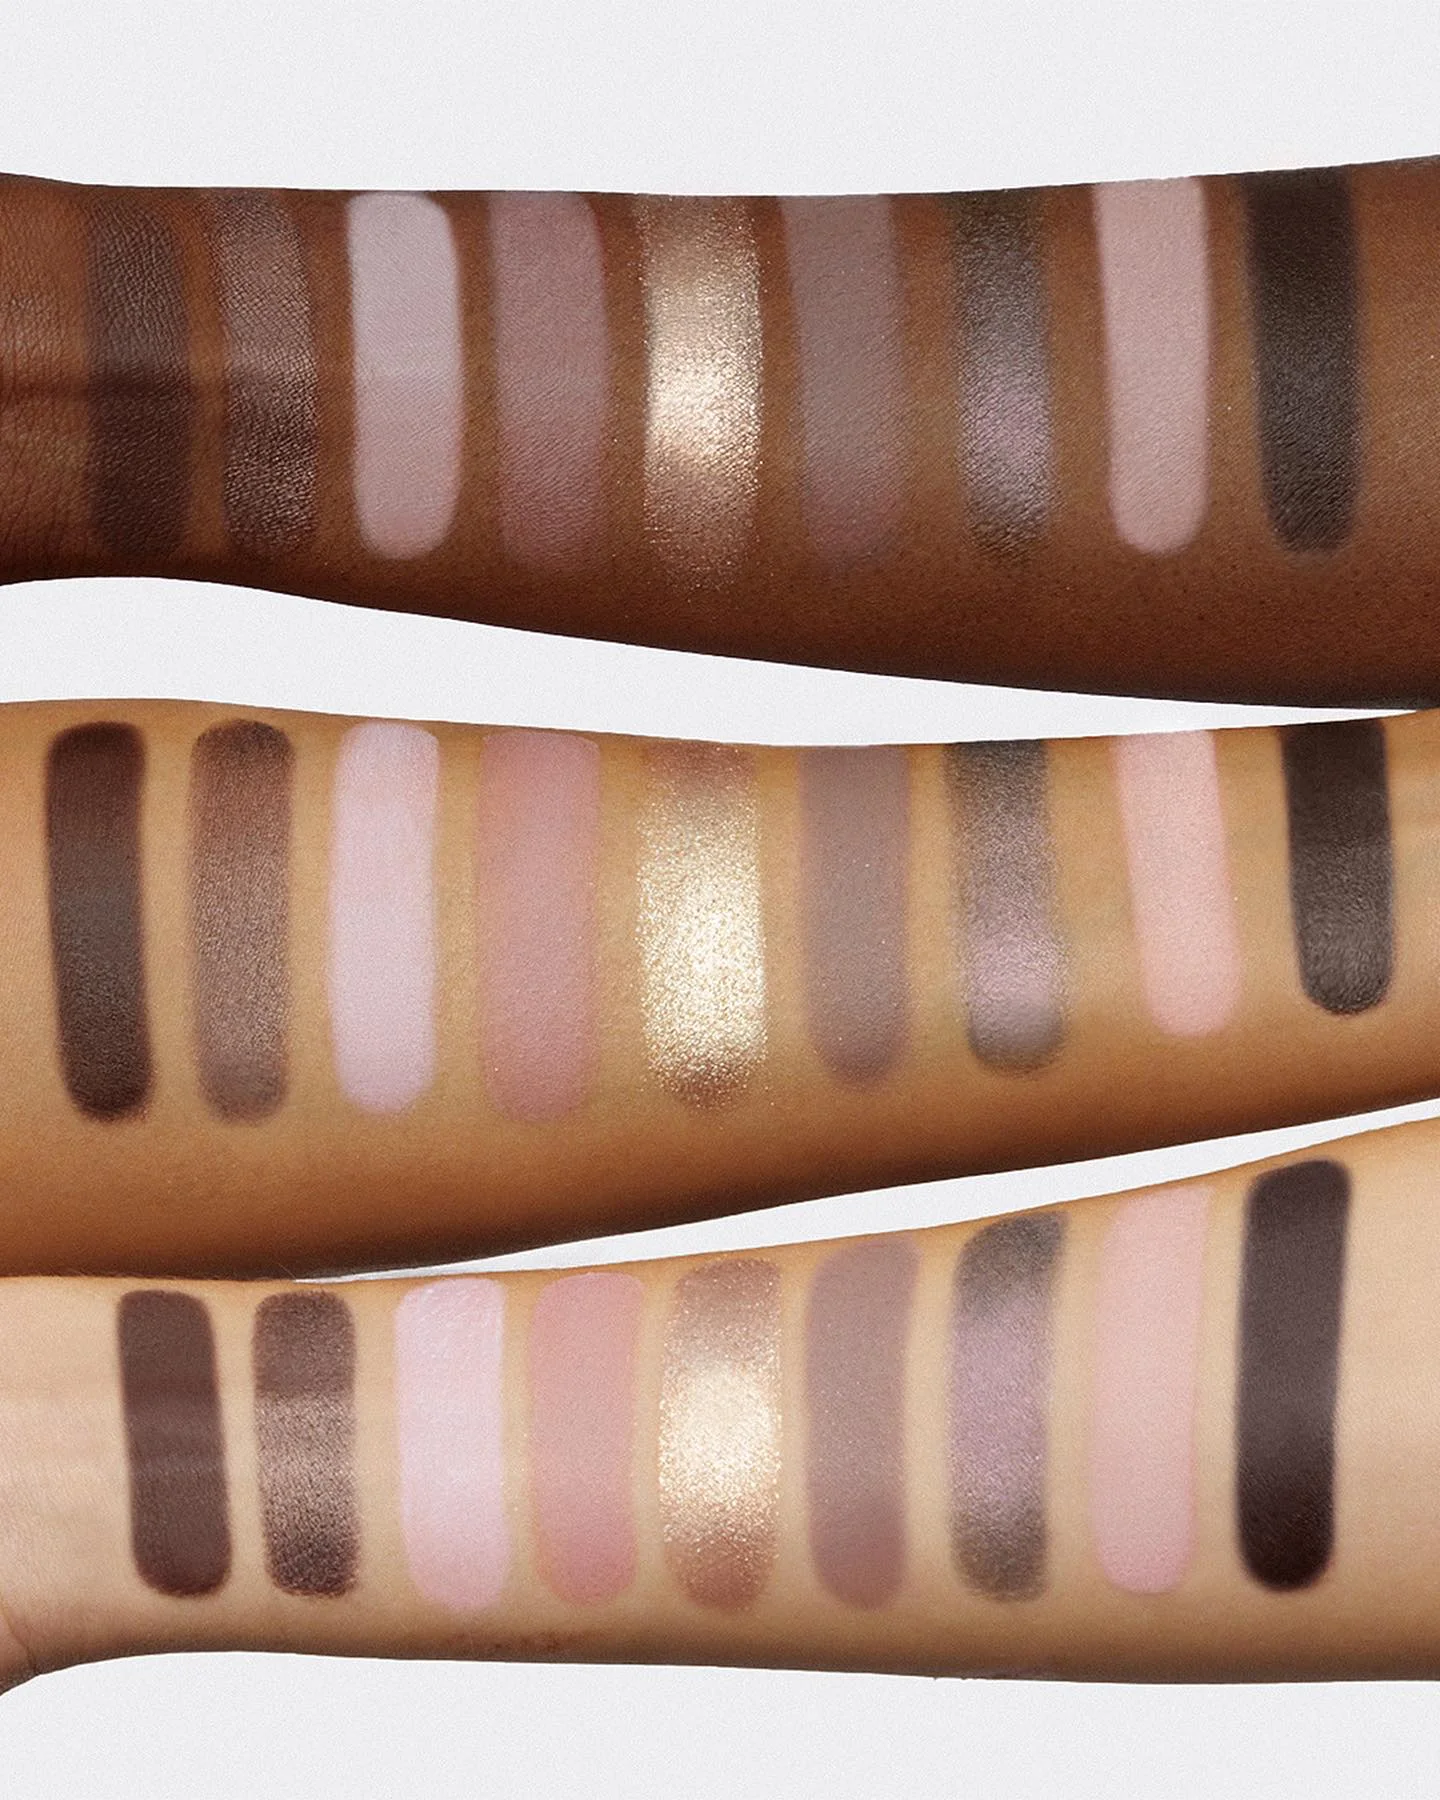 huda beauty creamy obsession swatches